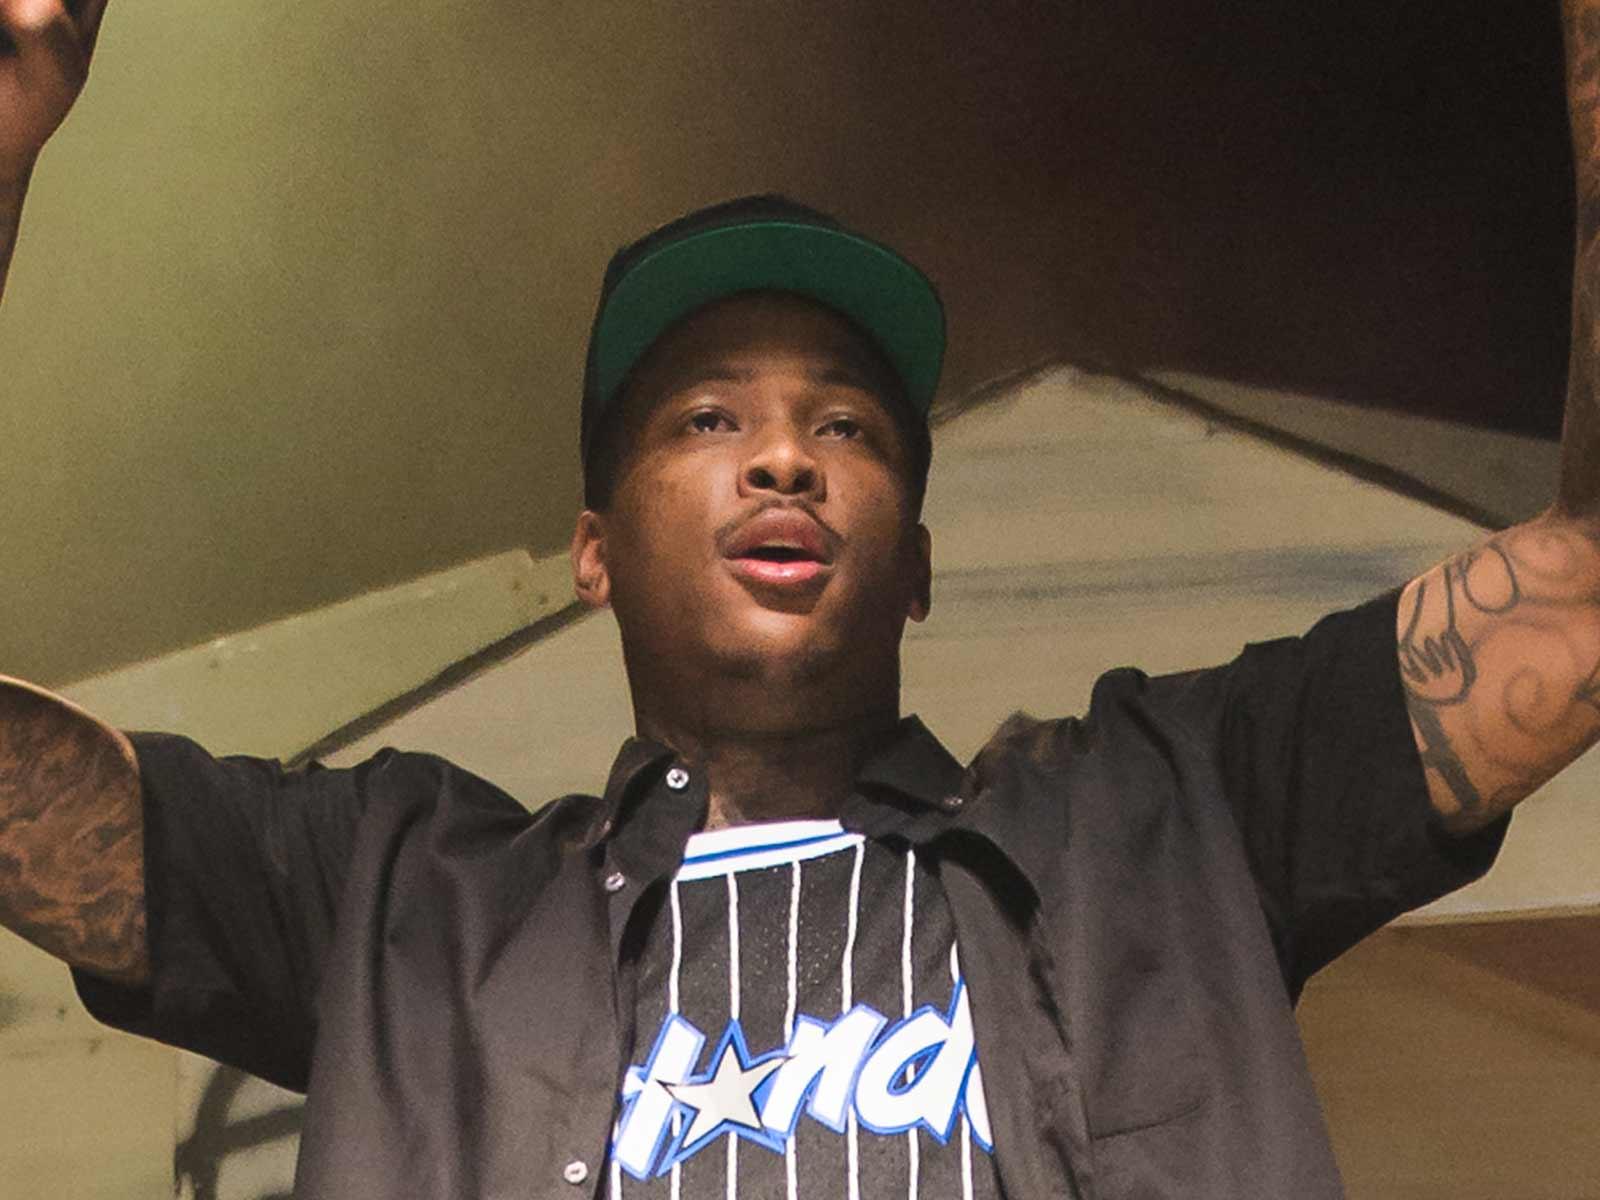 Las Vegas Casino Blames YG for Alleged Beatdown and Robbery